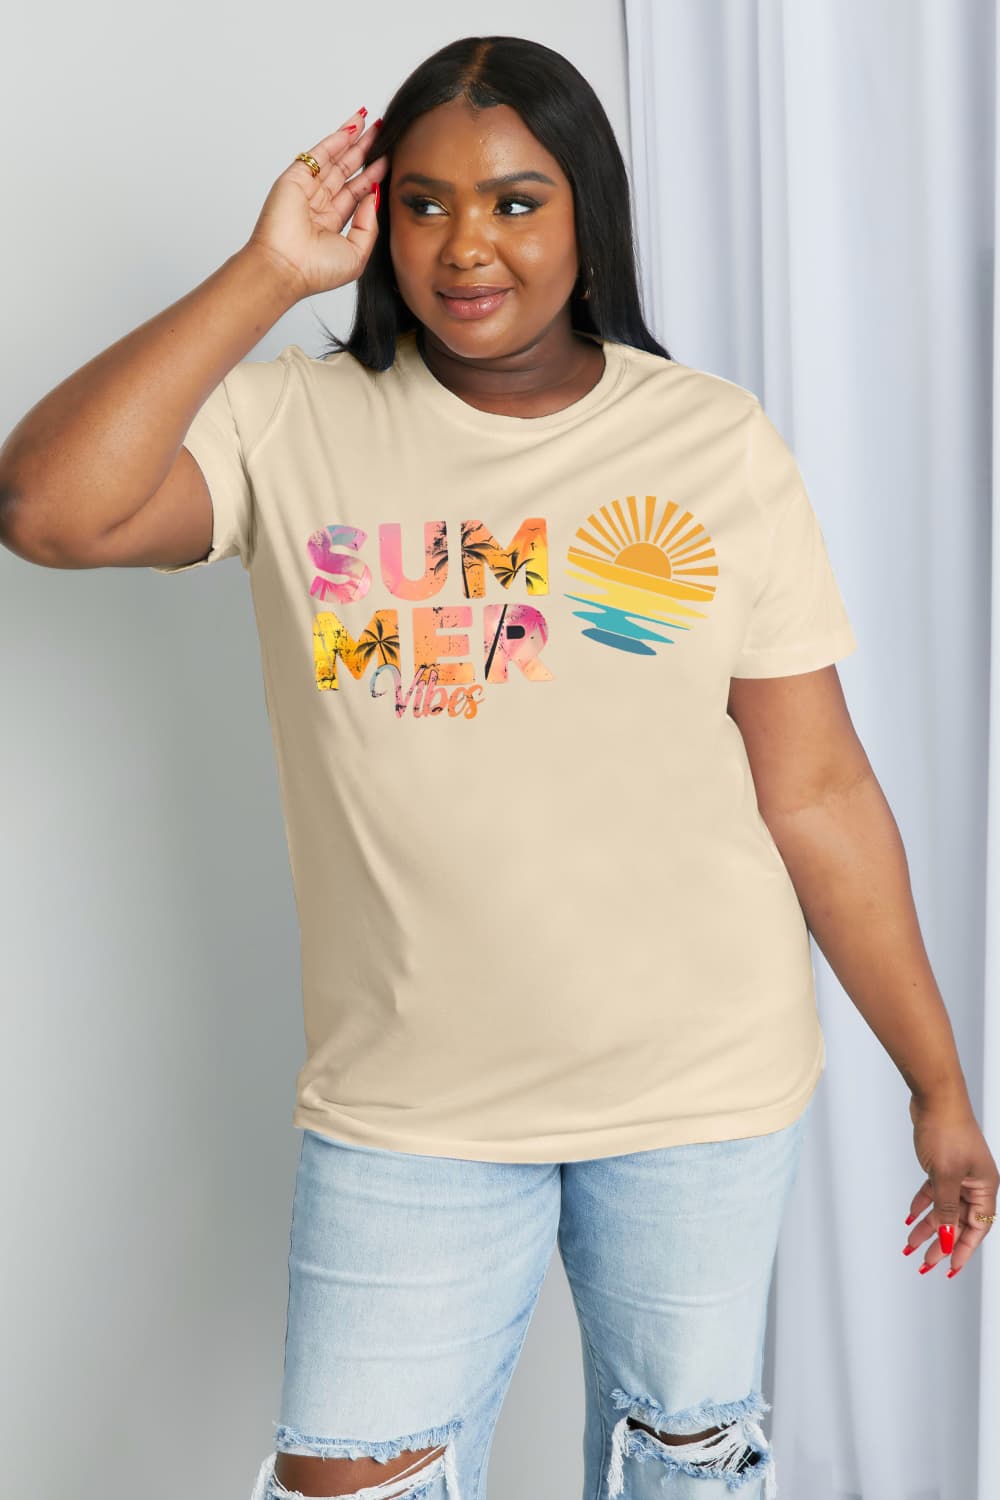 Simply Love Full Size SUMMER VIBES Graphic Cotton Tee